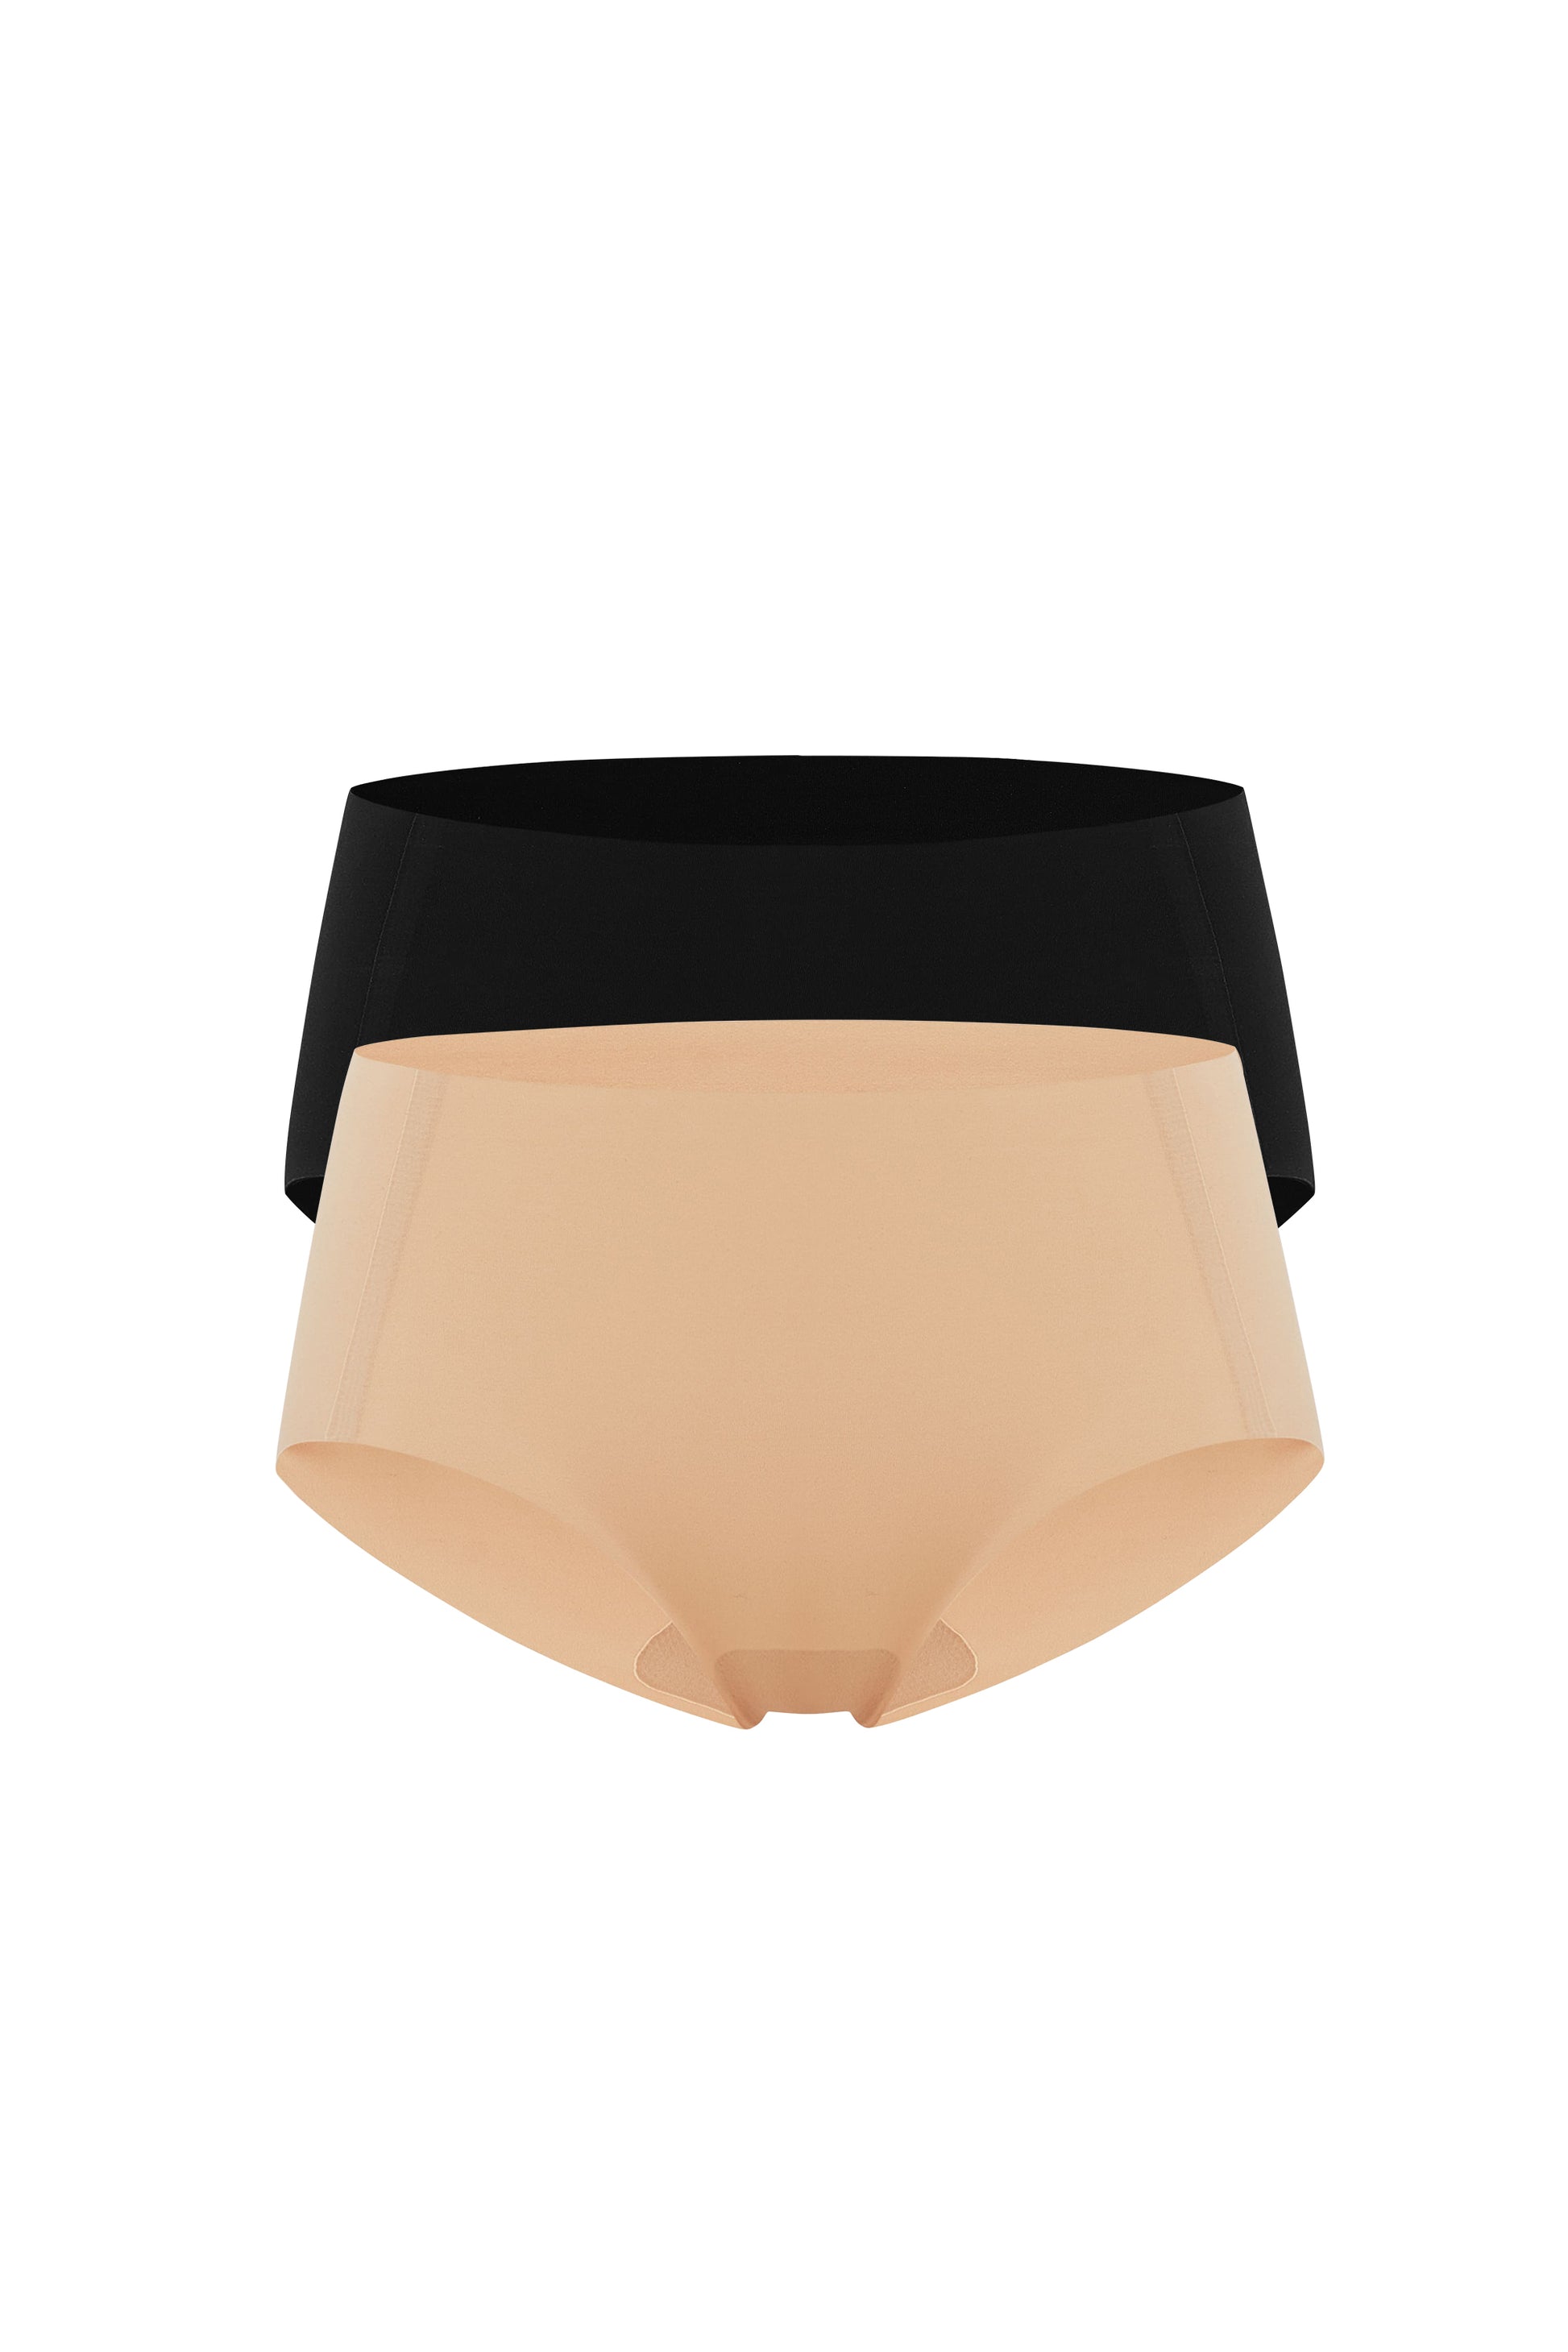 Flat lay images of tan and black underwear briefs